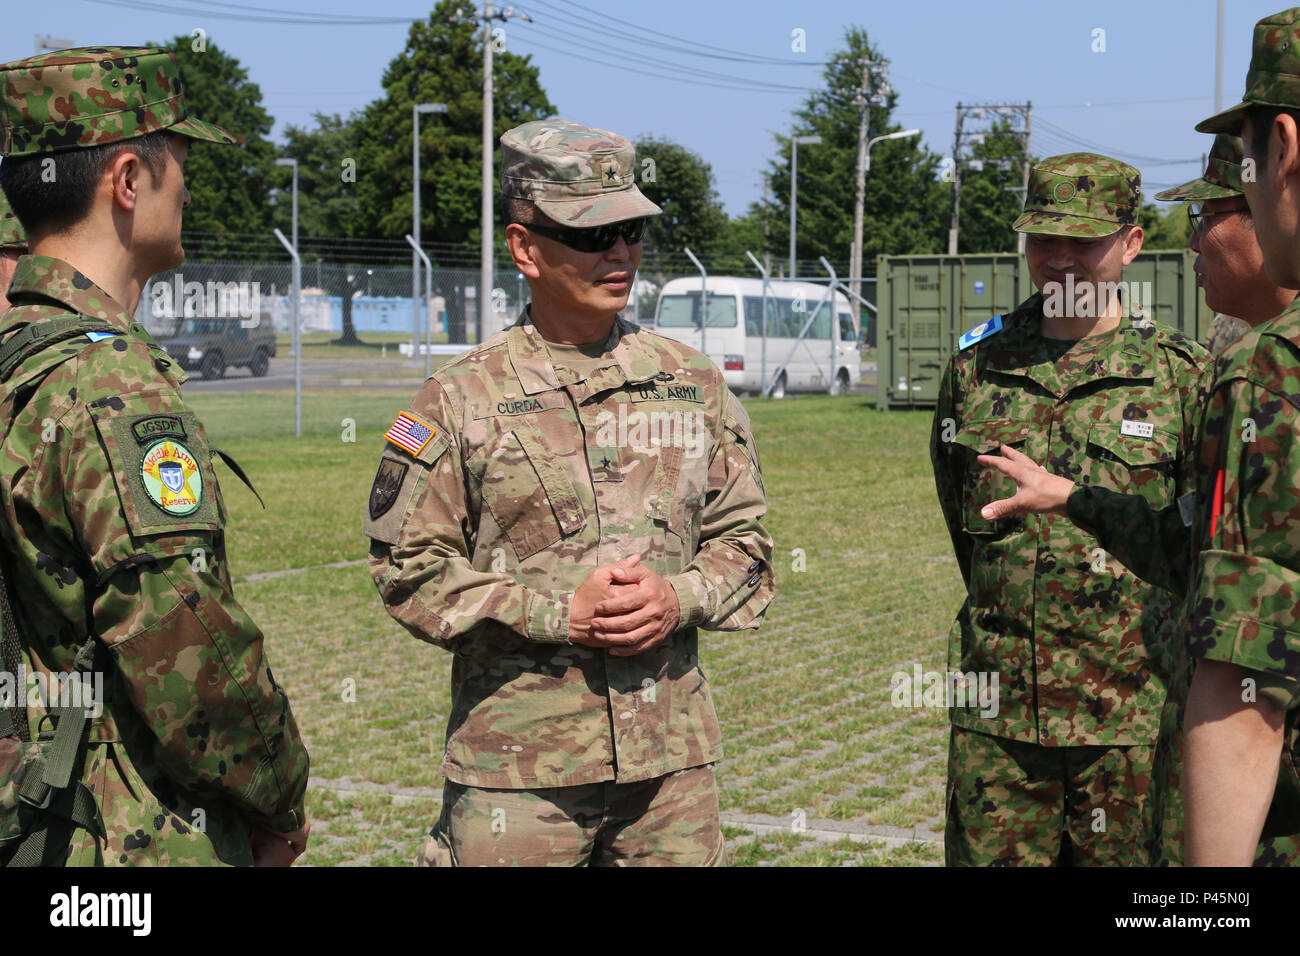 Brig. Gen. Stephen K. Curda (center), Commander, 9th Mission Support Command, visits with Japan Ground Self-Defense Force (JGSDF) service members at Sagamihara Depot Mission Training Complex during exercise Imua Dawn 2016, Sagamihara, Japan, June 18, 2016.  Imua Dawn 2016 provides opportunities for U.S. and Japanese forces to come together and train for potential real world events, better preparing them in supporting regional populations in all Humanitarian Assistance and Disaster Relief (HADR) and Noncombatant Evacuation Operations (NEO). Training together, the U.S. and Japan Ground Self-Defe Stock Photo